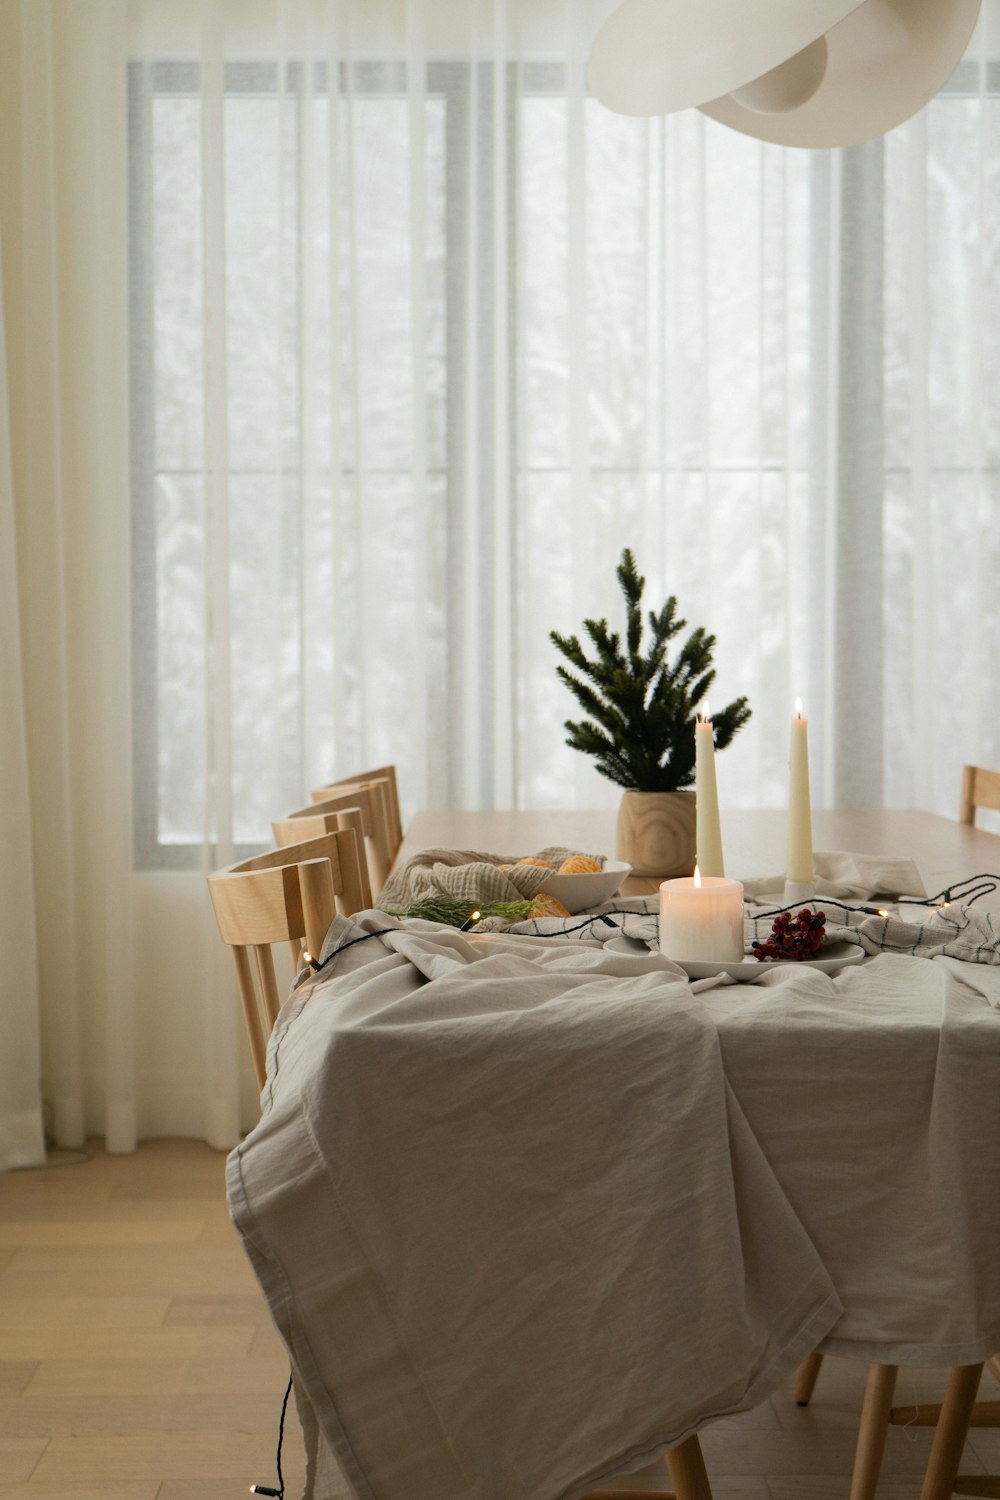 a dining room table with a christmas tree in the corner